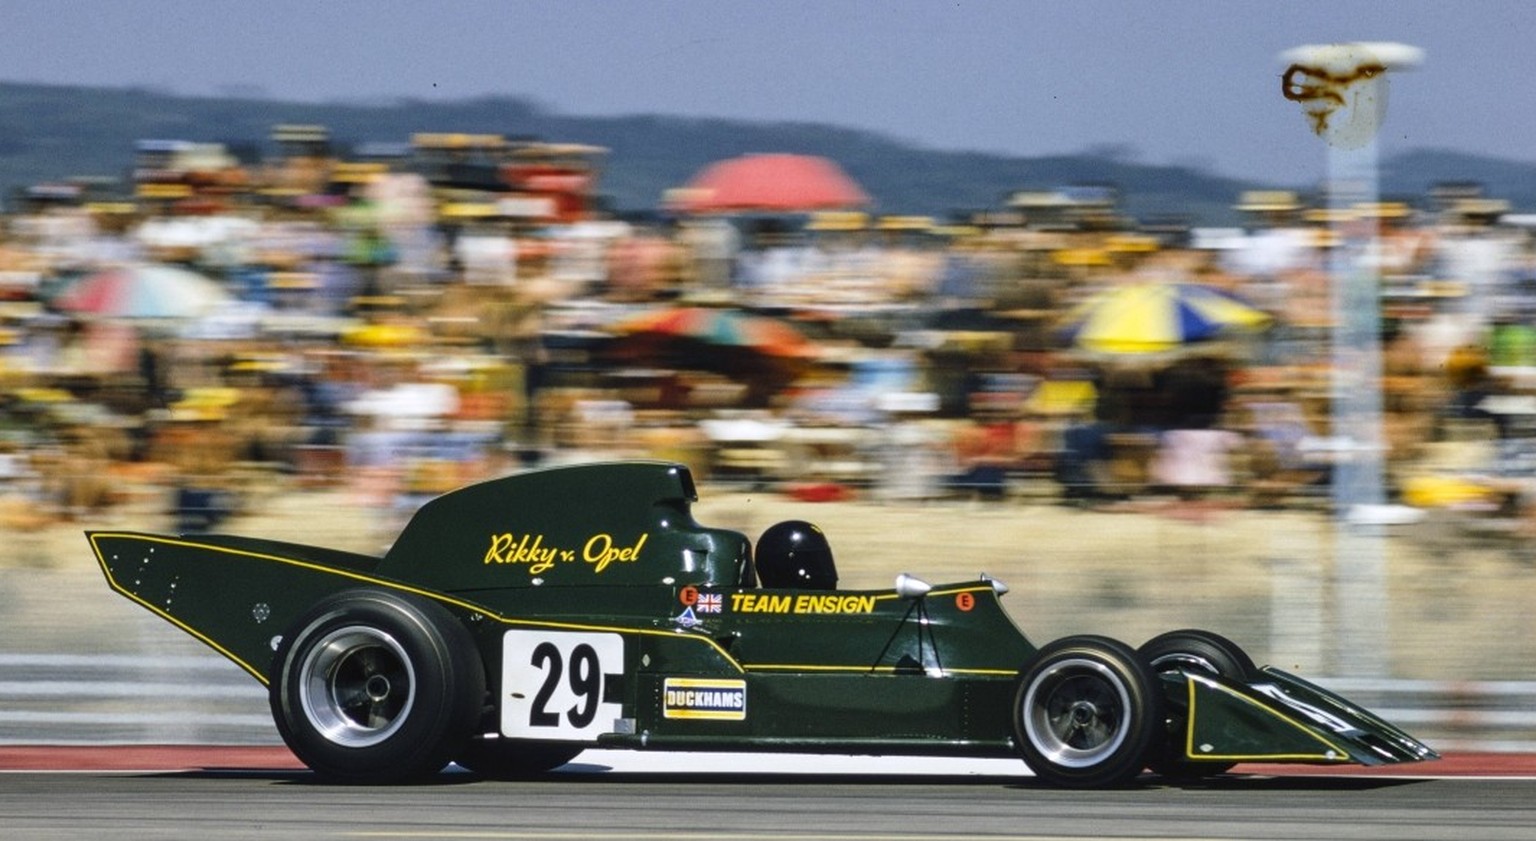 IMAGO / Motorsport Images

1973 French GP CIRCUIT PAUL RICARD, FRANCE - JULY 01: Rikky von Opel, Ensign N173 Ford during the French GP at Circuit Paul Ricard on July 01, 1973 in Circuit Paul Ricard, F ...